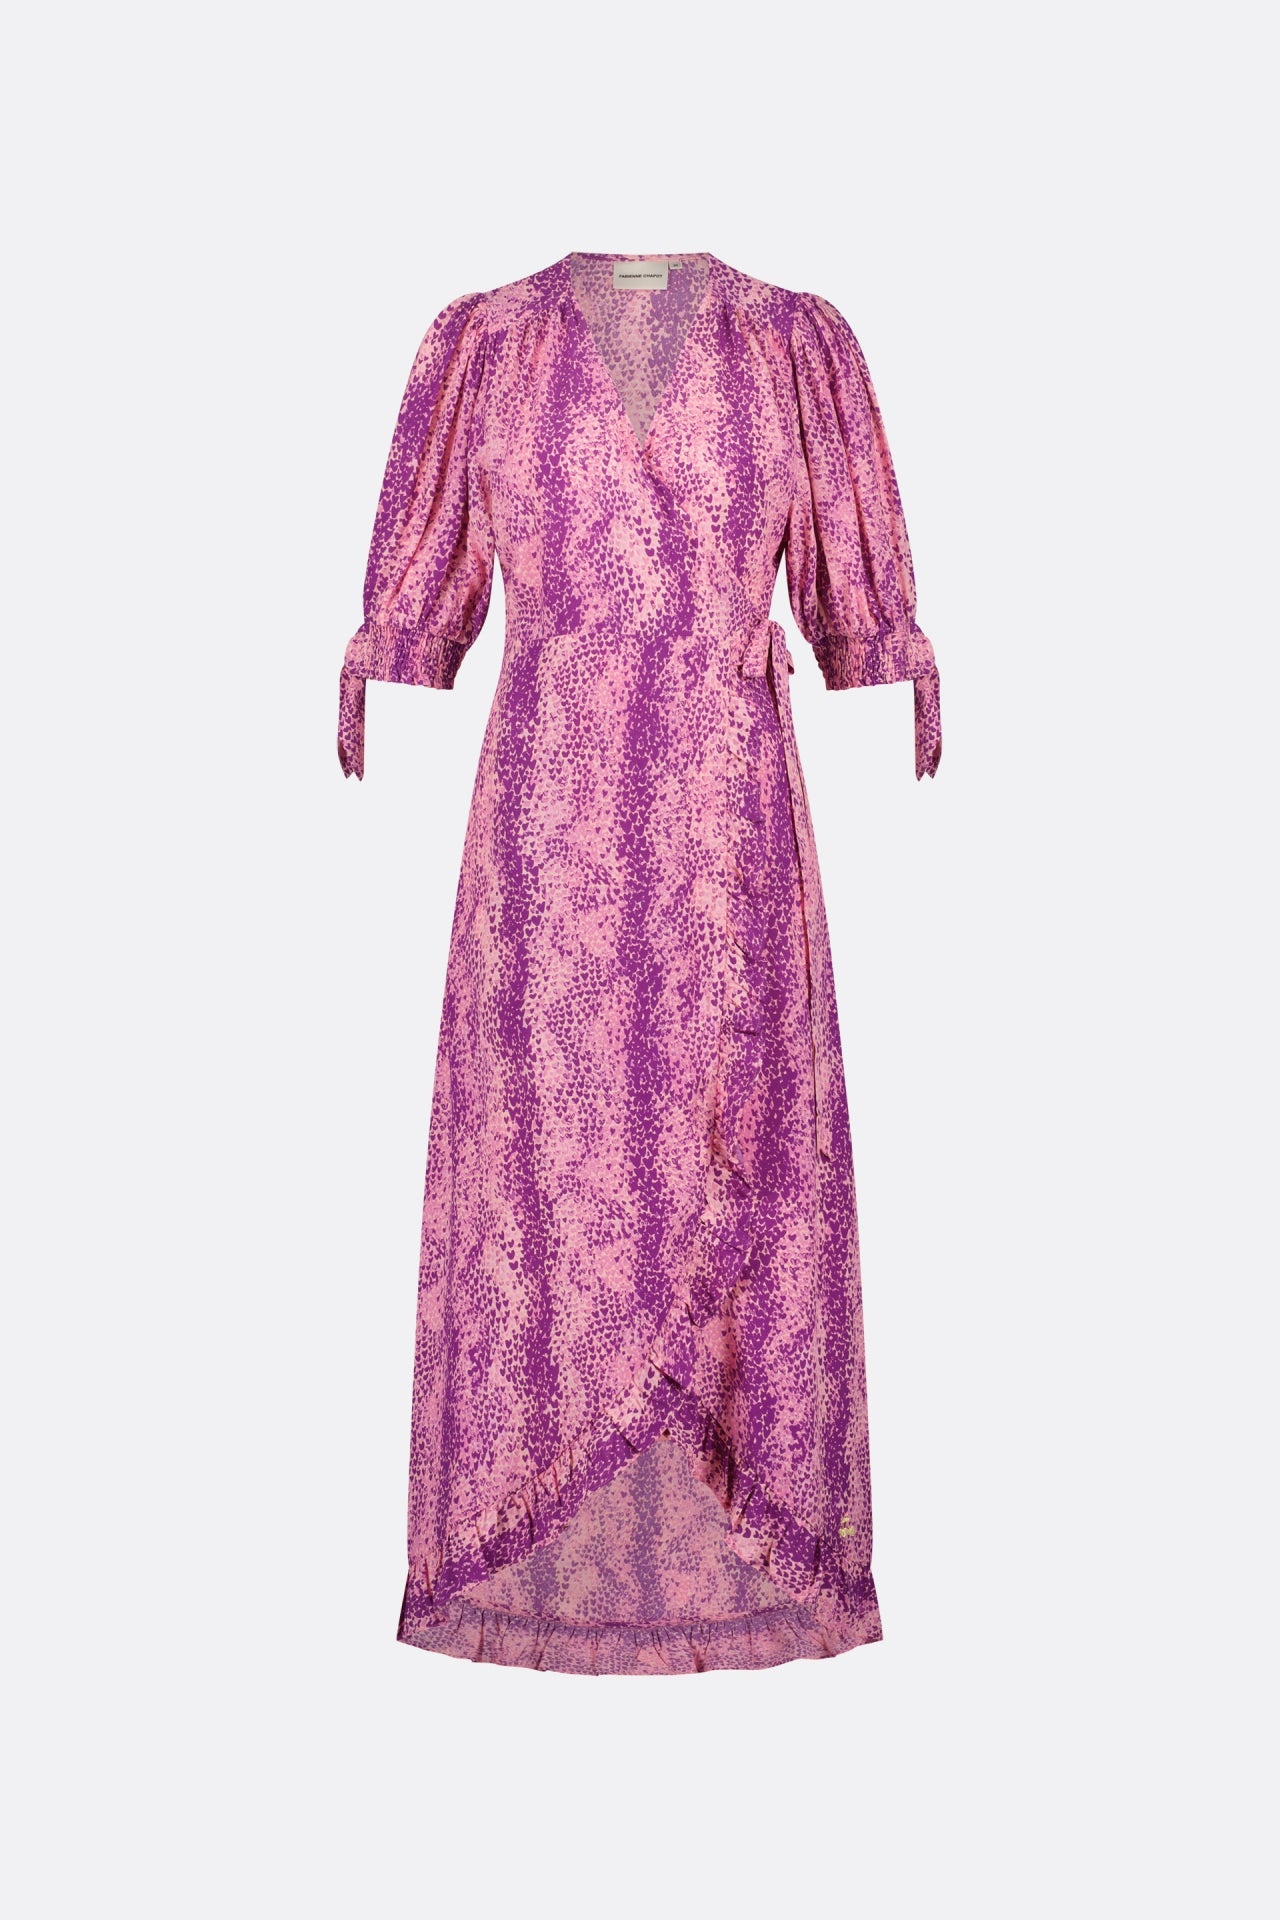 A Magic Magenta Channa Dress by Fabienne Chapot, with a sleeved sleeve and a trendy snake print pattern.